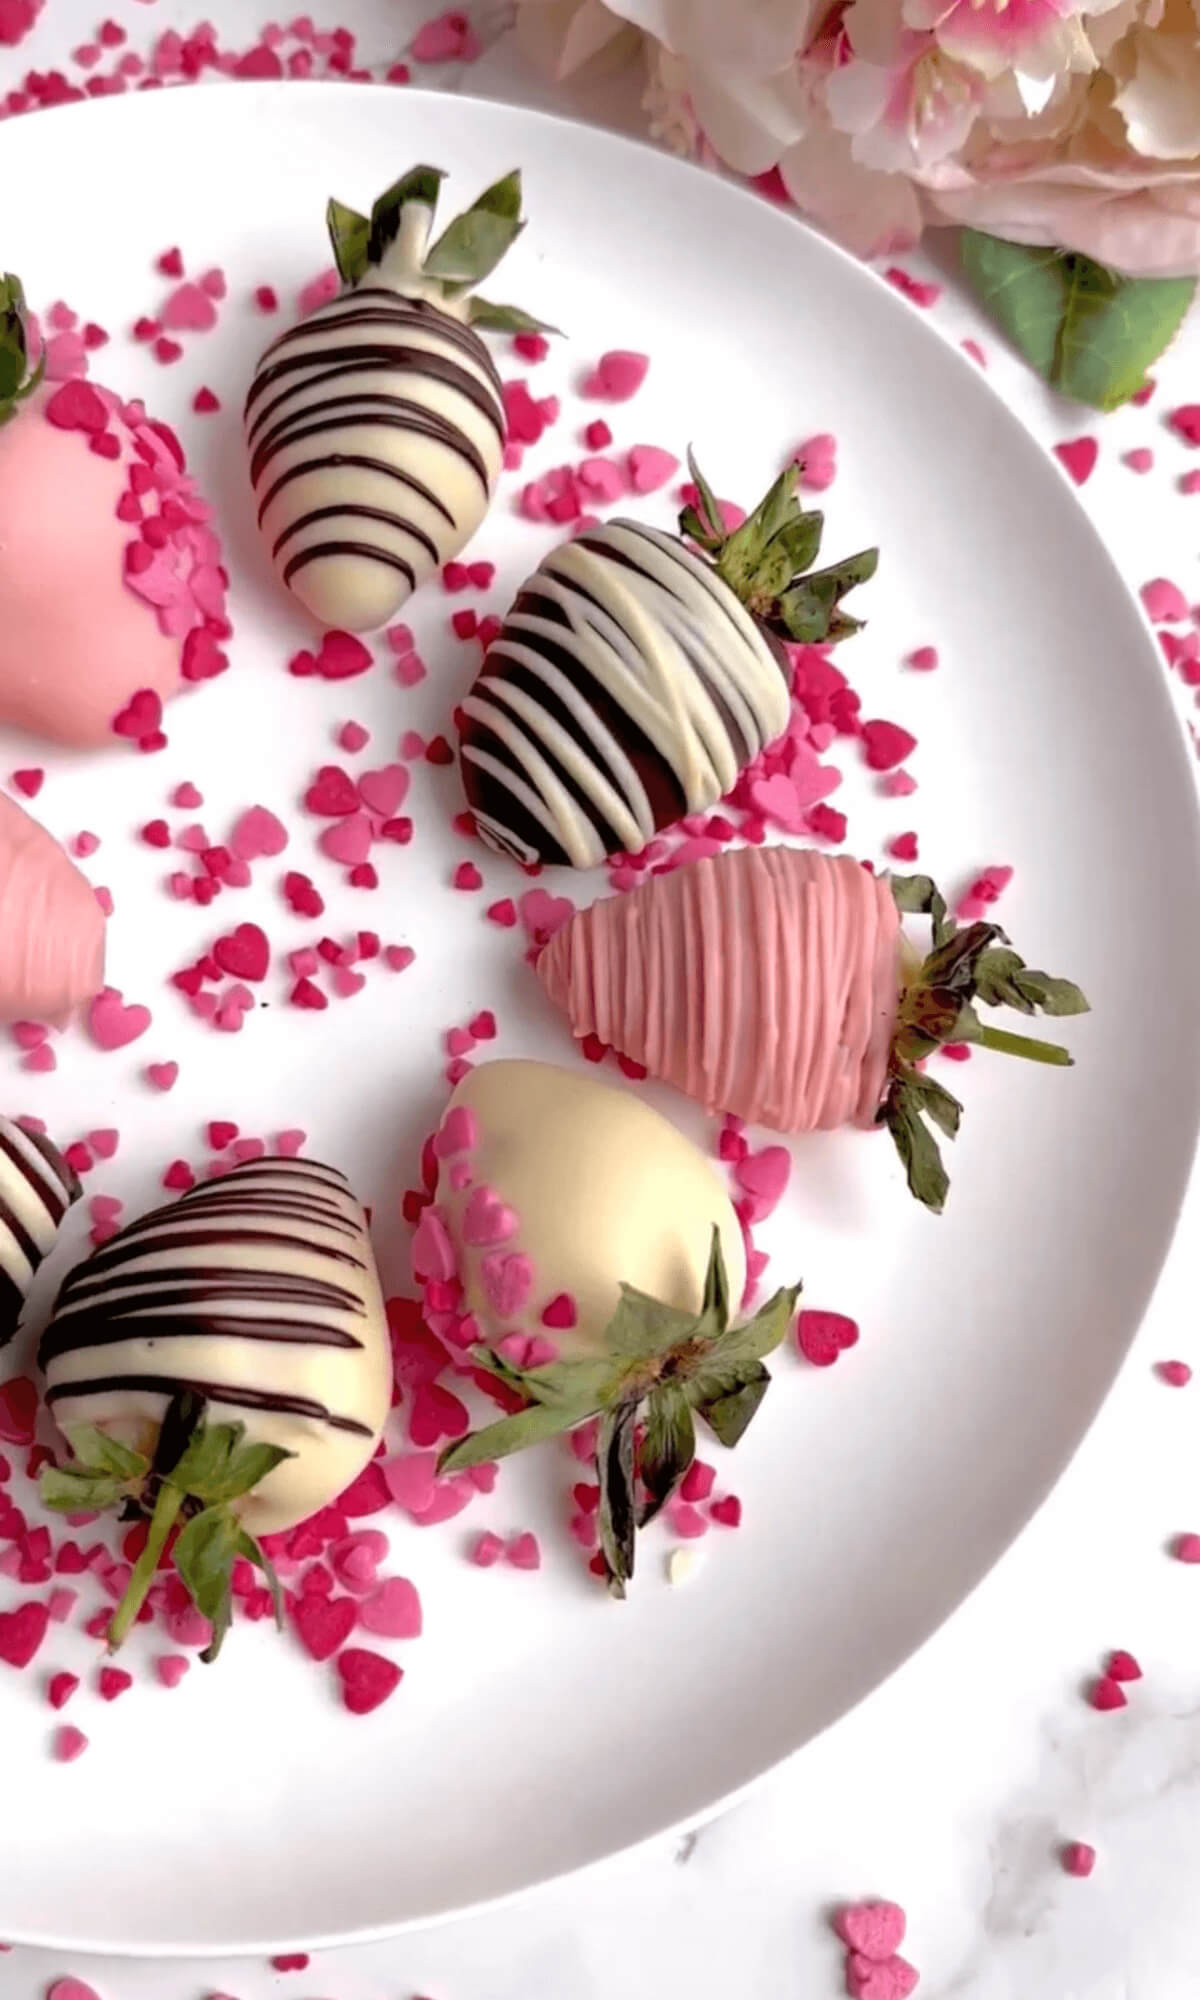 Colorful strawberries dipped in chocolate. Some are pink, red, or white, while others have dark chocolate. Each berry is decorated with striped chocolate designs, making them look delicious and pretty.